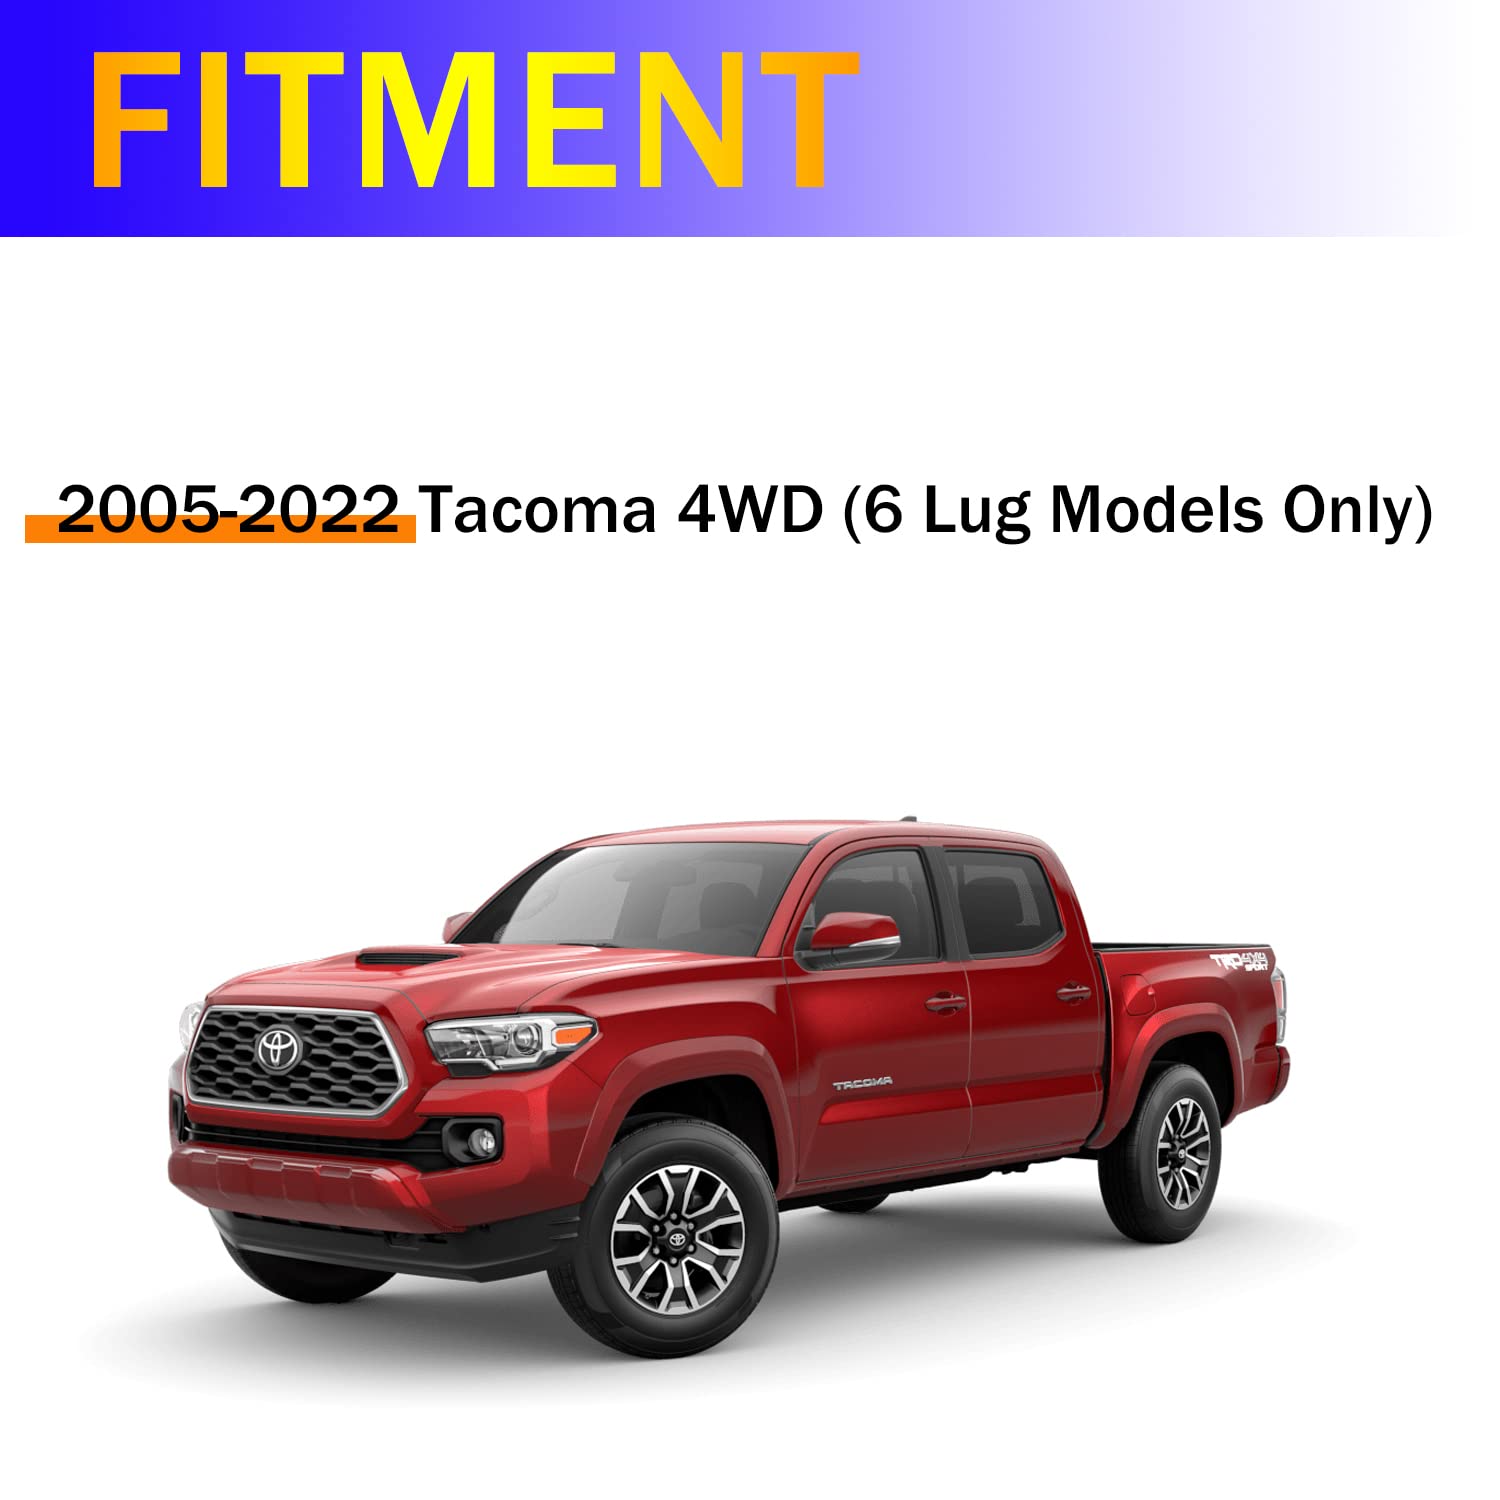 Front 3.0 inch+Rear 2.0 inch Leveling Kits for 05-22 Tacoma - GARVEE